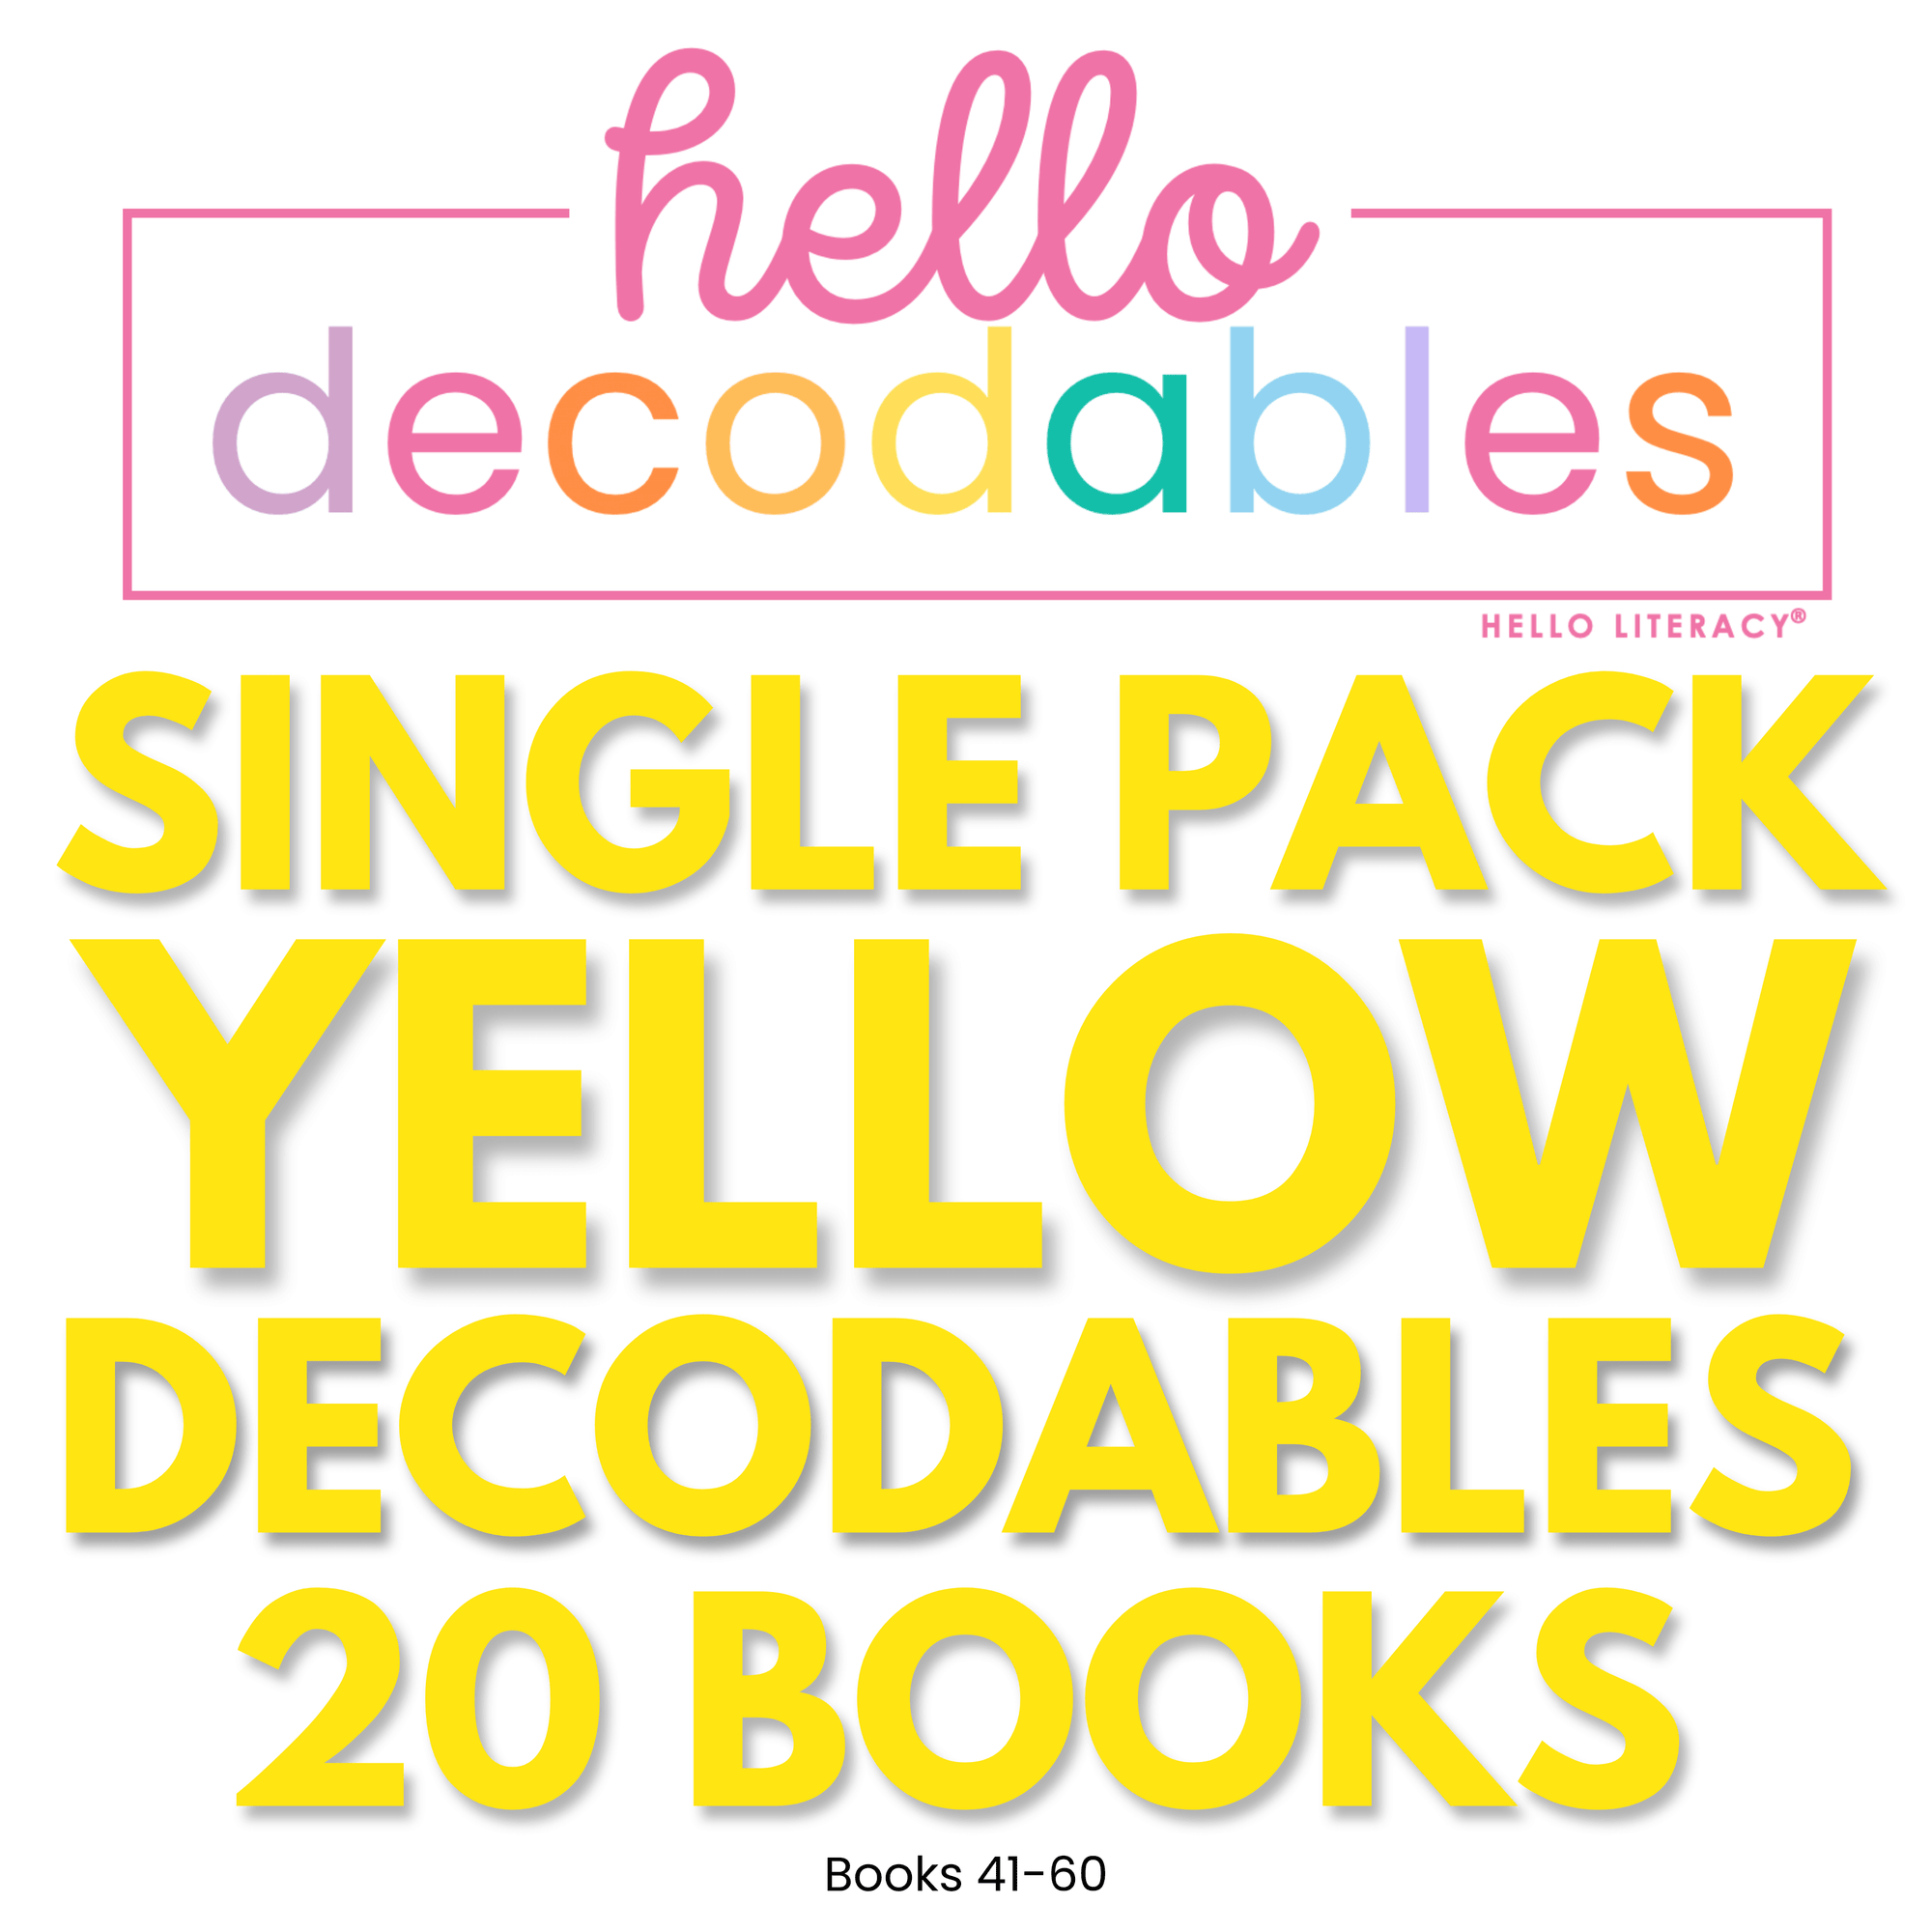 Yellow Fiction Books: Single Pack - Hello Decodables